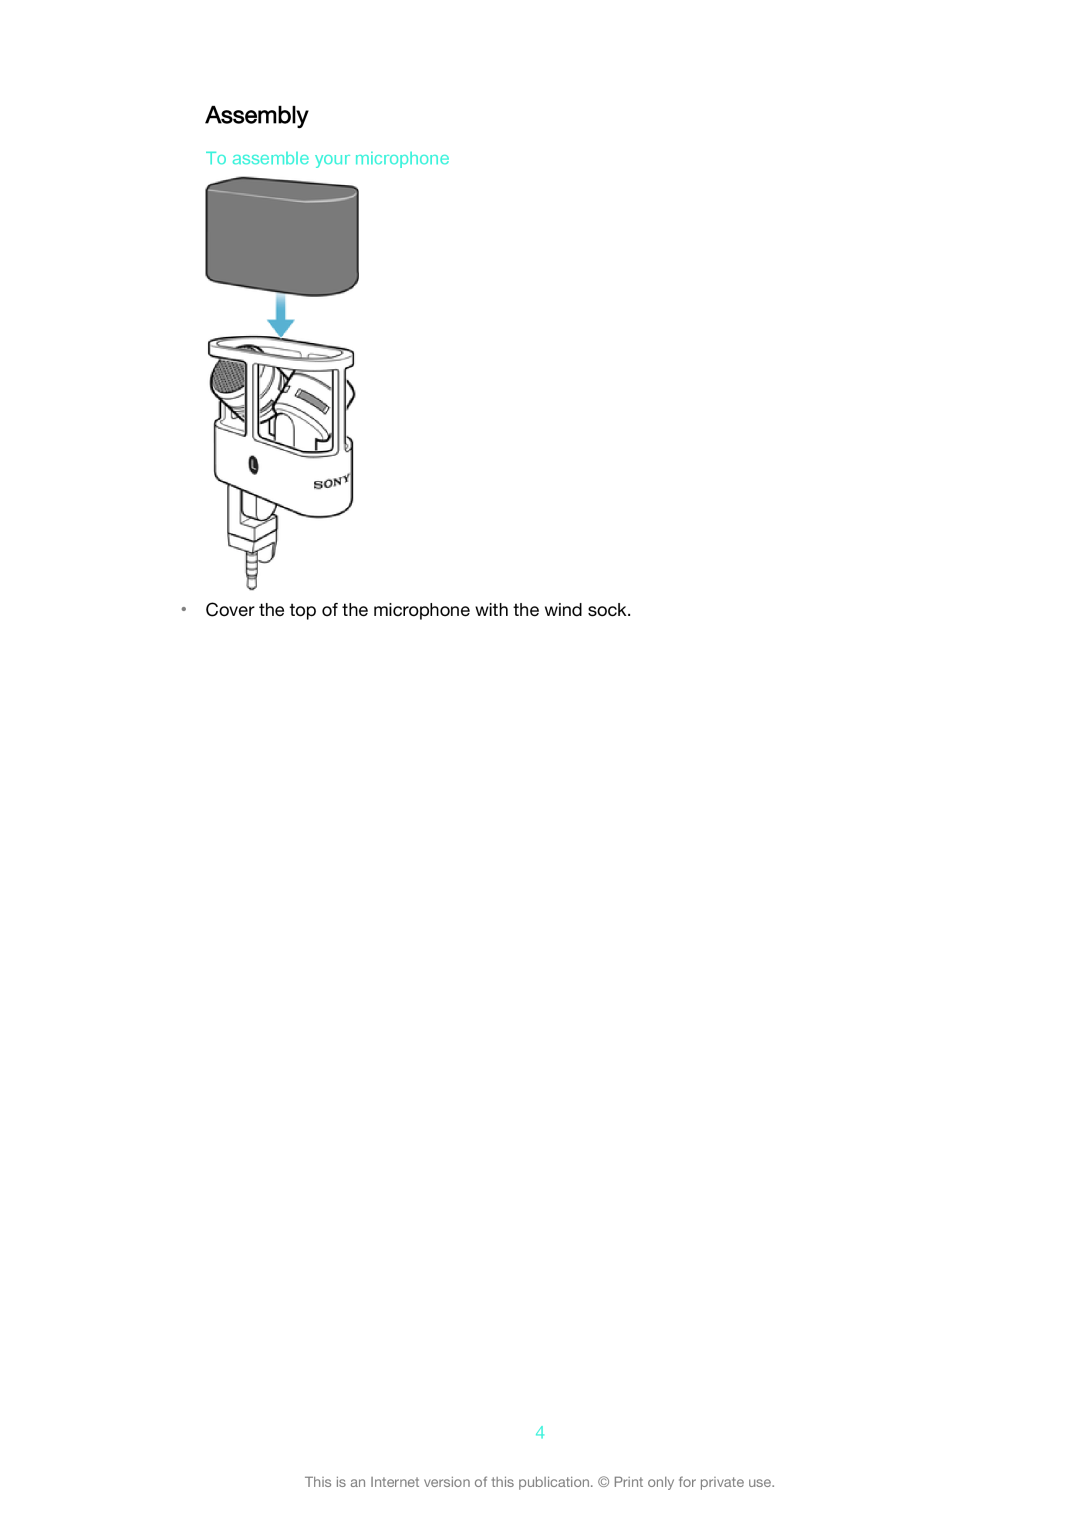 Sony STM10 manual Assembly, To assemble your microphone 